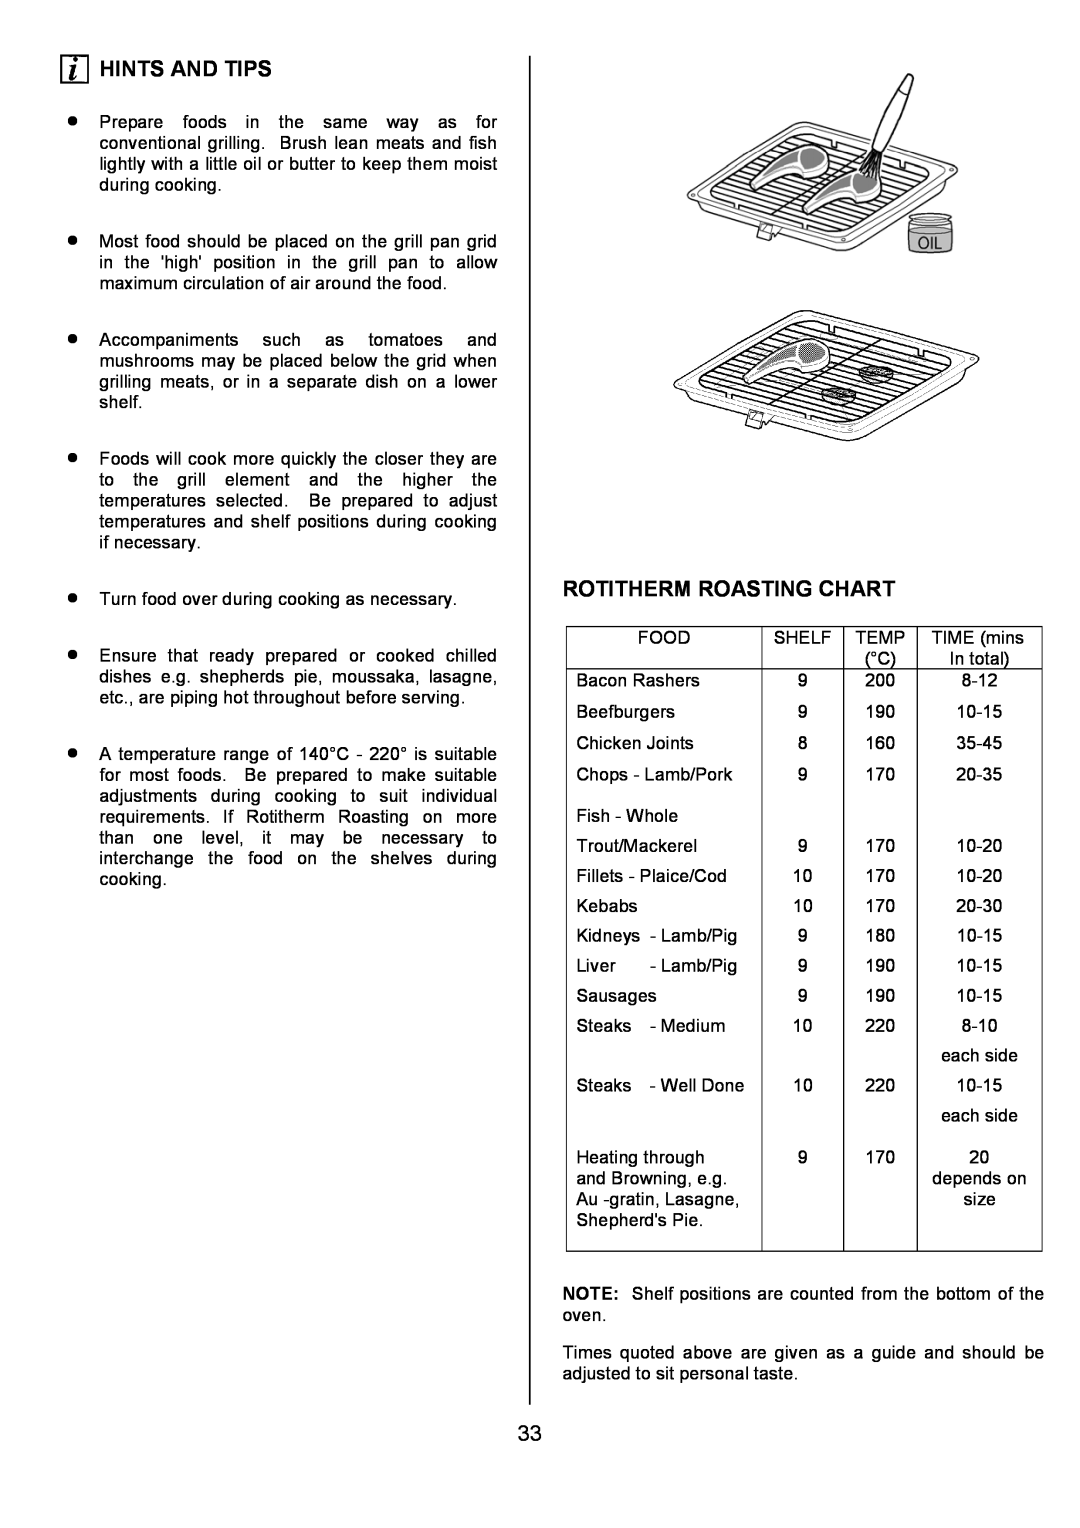 AEG 311704300, U7101-4 manual Hints And Tips, Rotitherm Roasting Chart, Turn food over during cooking as necessary 